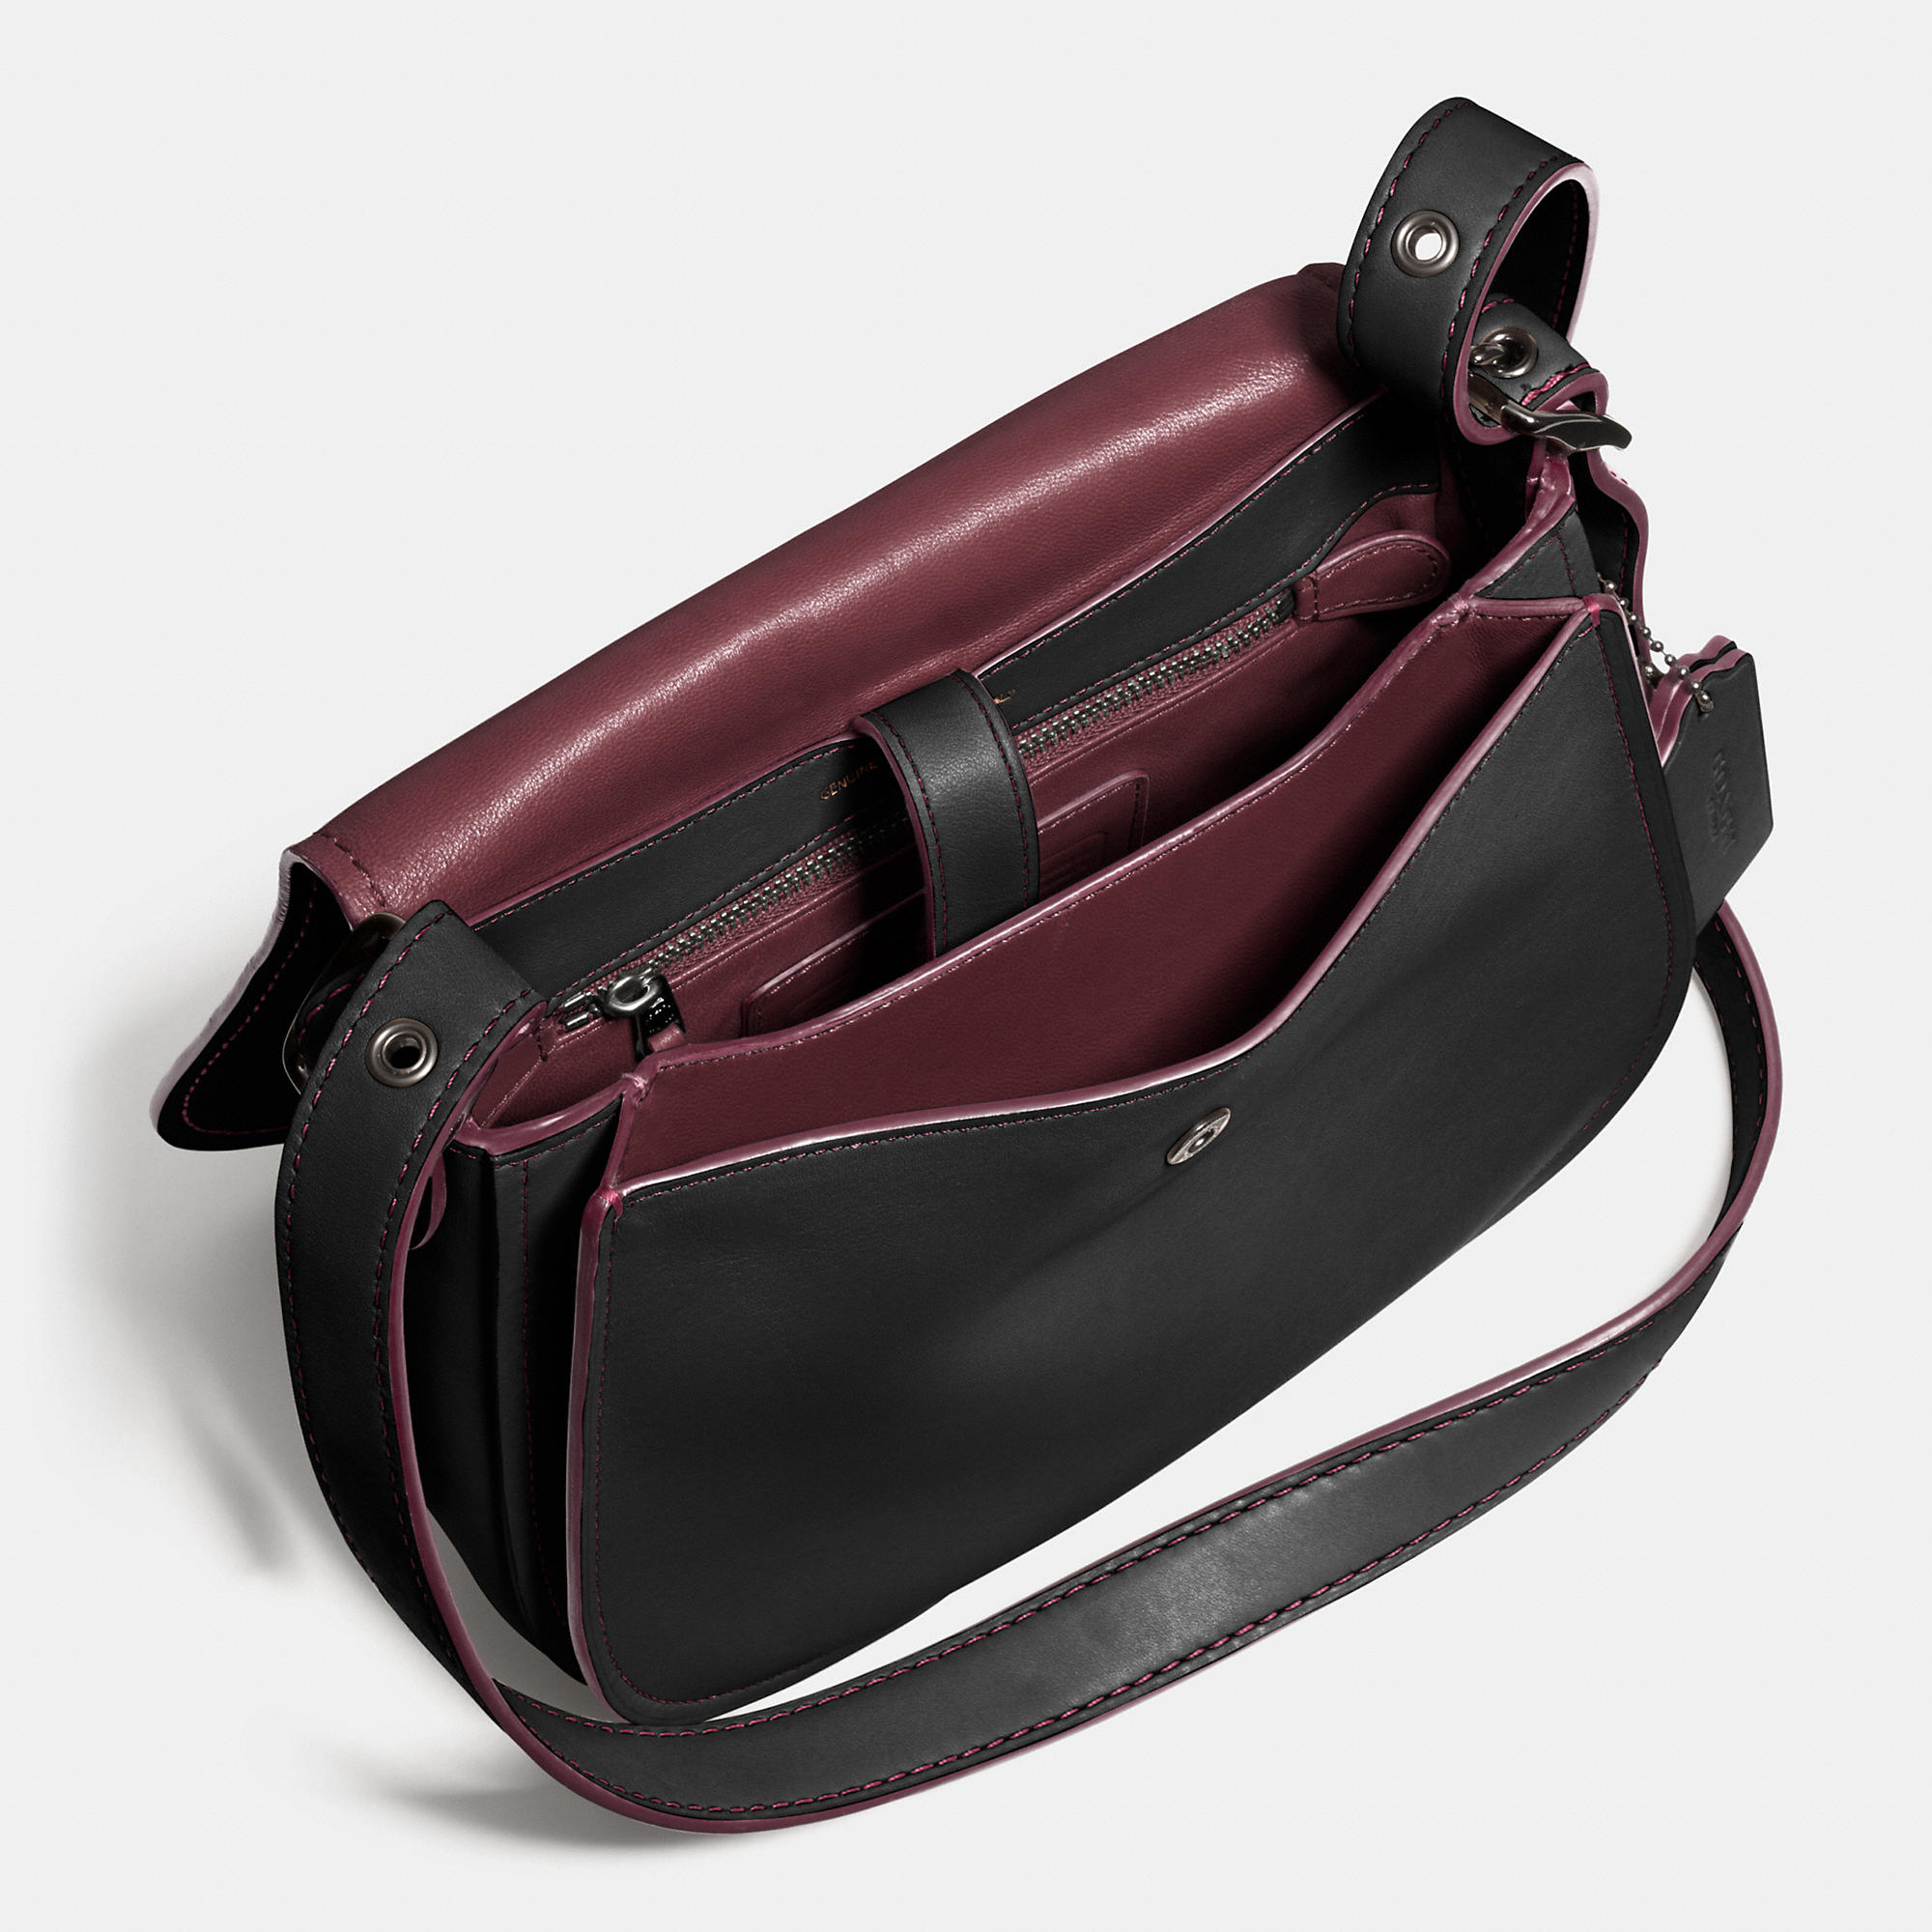 Top-Handle Bags Coach Saddle Bag 23 In Glovetanned Leather [Coach Outlet 3043] - $46.75 : Coach ...